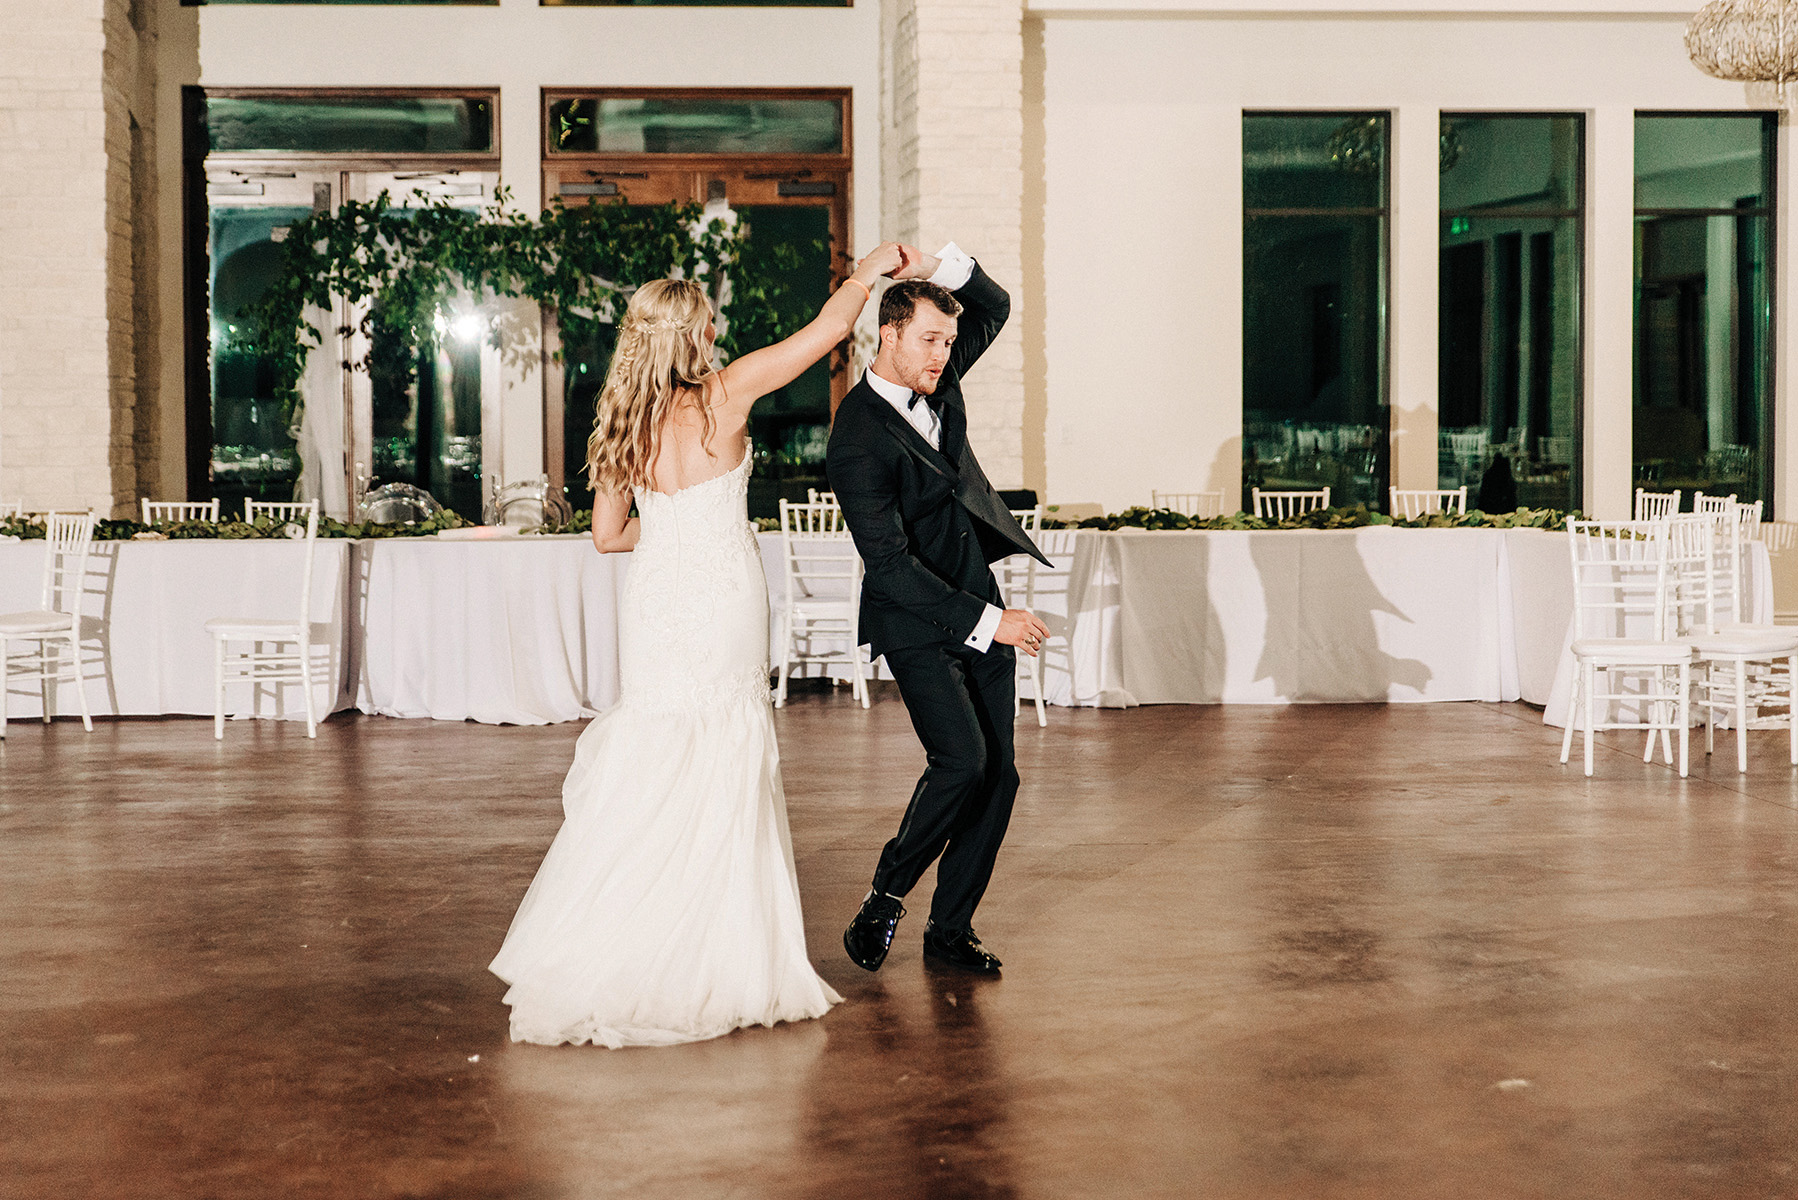 first dance - wedding entertainment - country